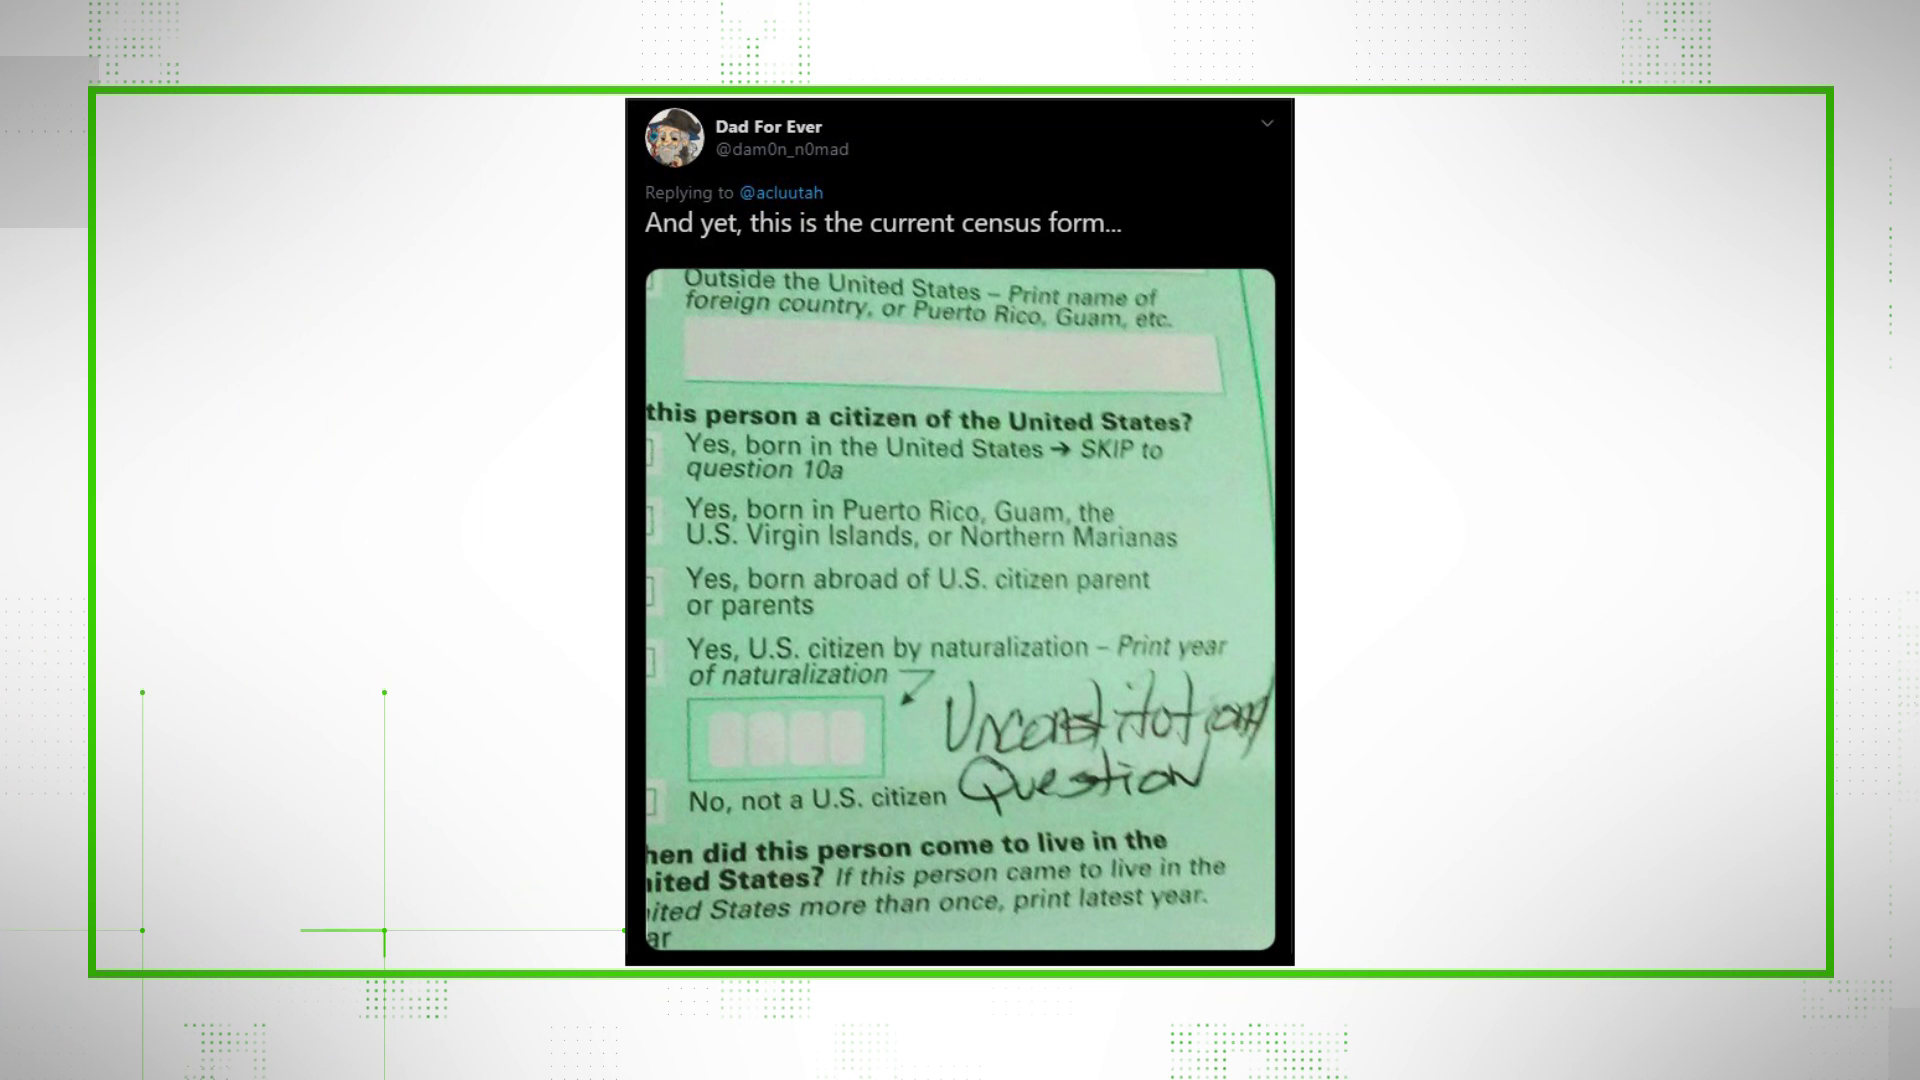 A viral social media post claims the US Census still has a controversial citizenship question, but is it true? Chris Rogers verifies.